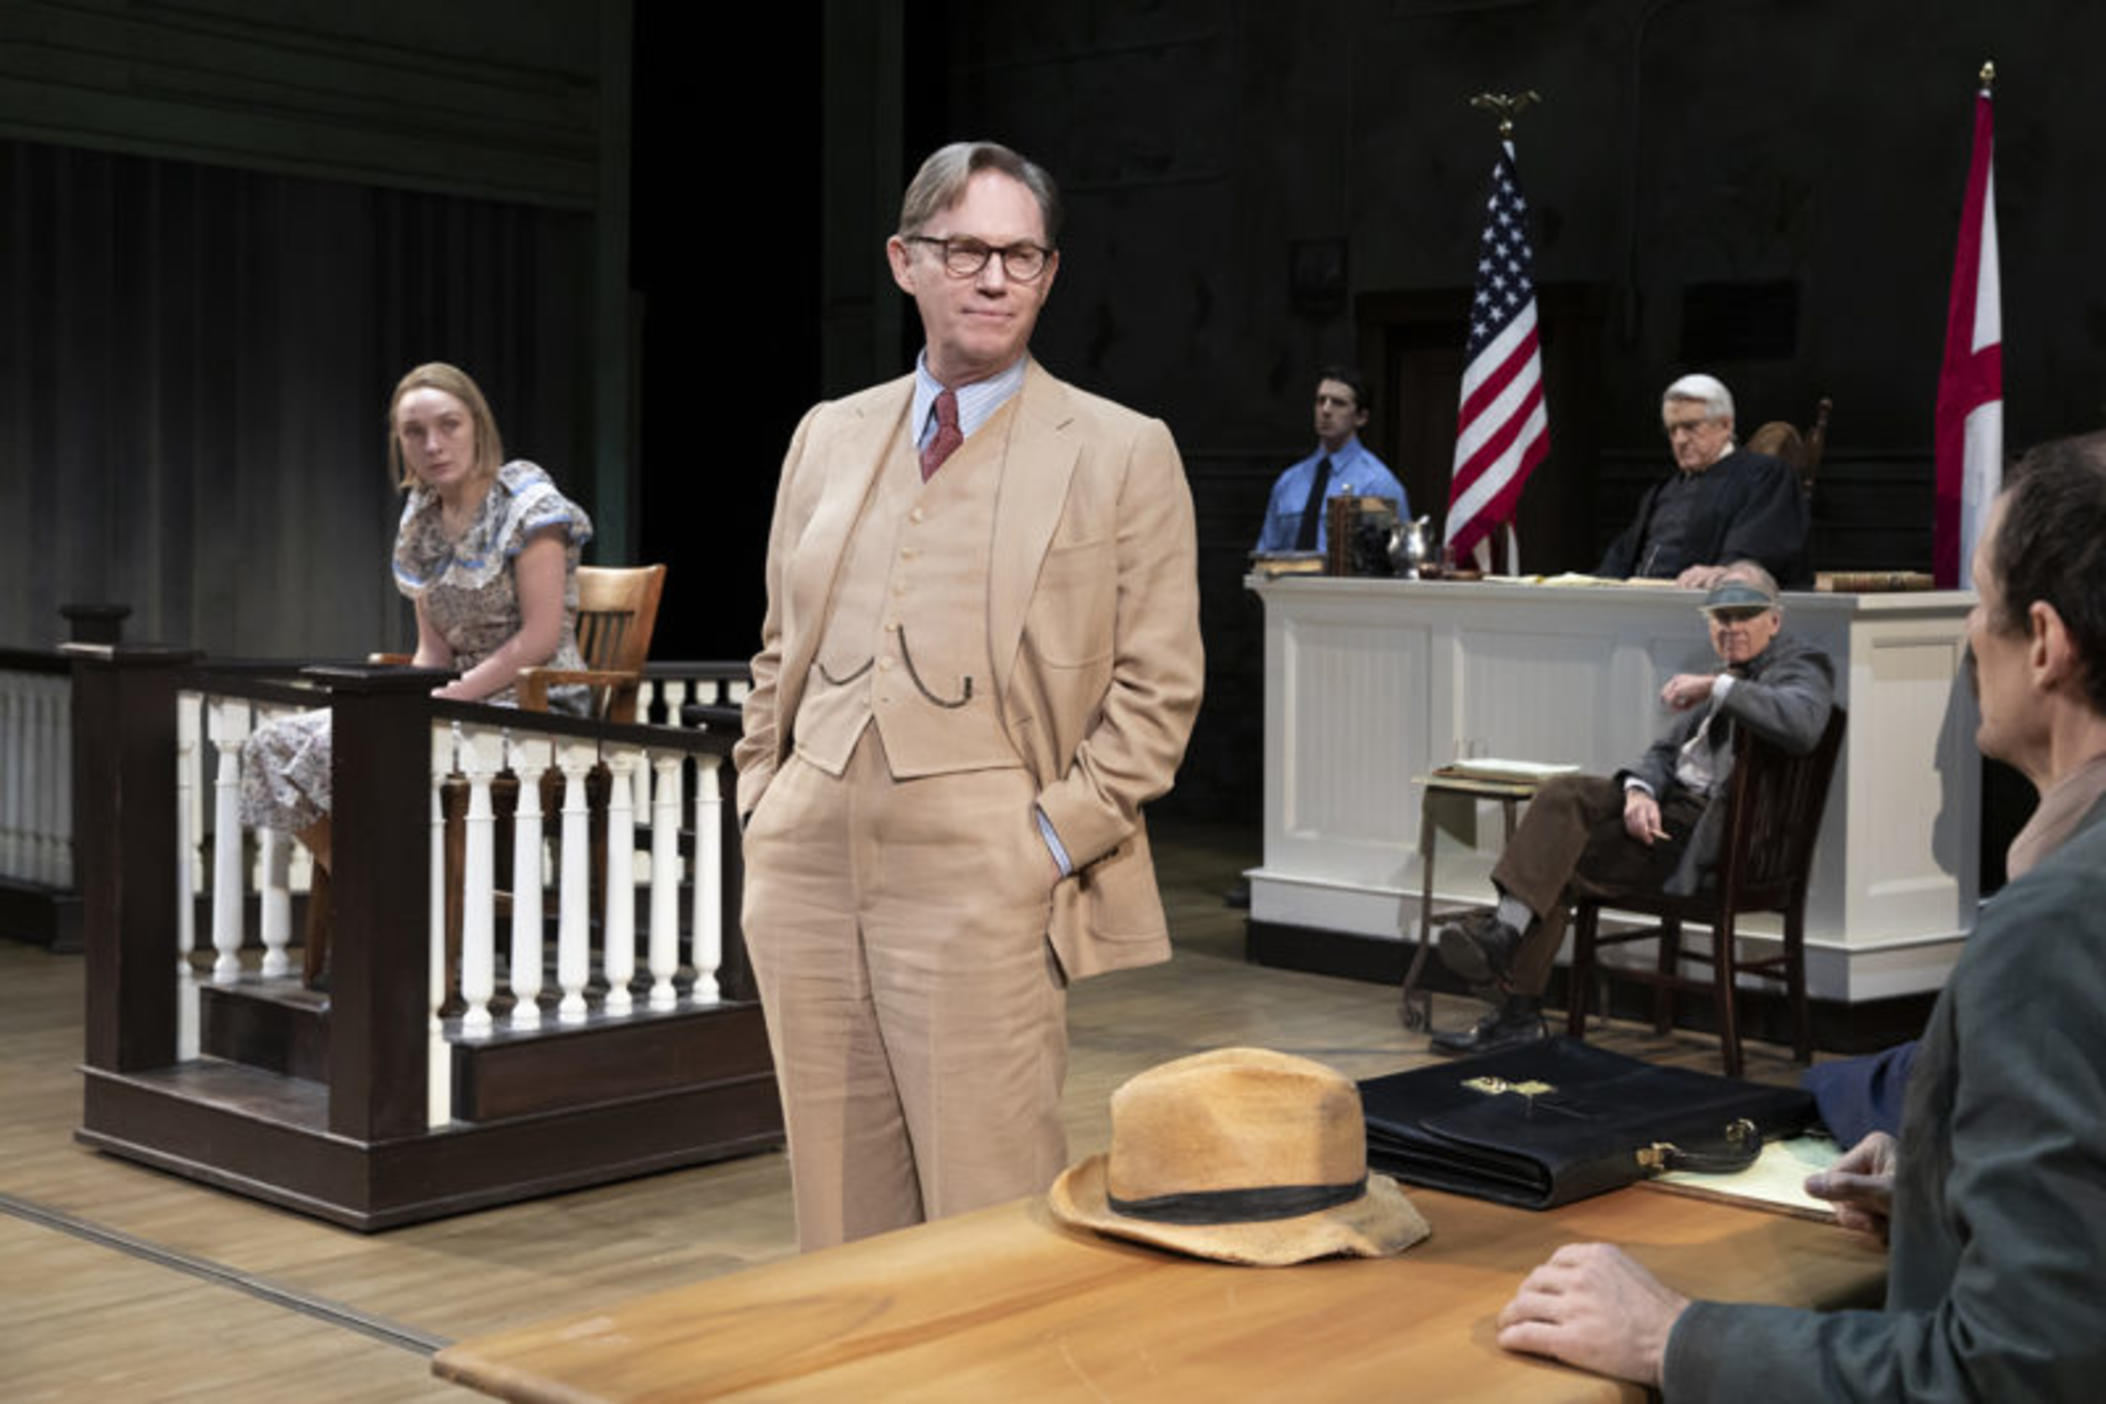 Actor Richard Thomas portrays Atticus Finch in the national touring production of "To Kill A Mockingbird," based on Harper Lee's 1960 novel set in depression-era Alabama. The story was adapted for the Broadway stage in 2018 by writer Aaron Sorkin. The play runs through May 12, 2024 at Atlanta's Fox Theatre.